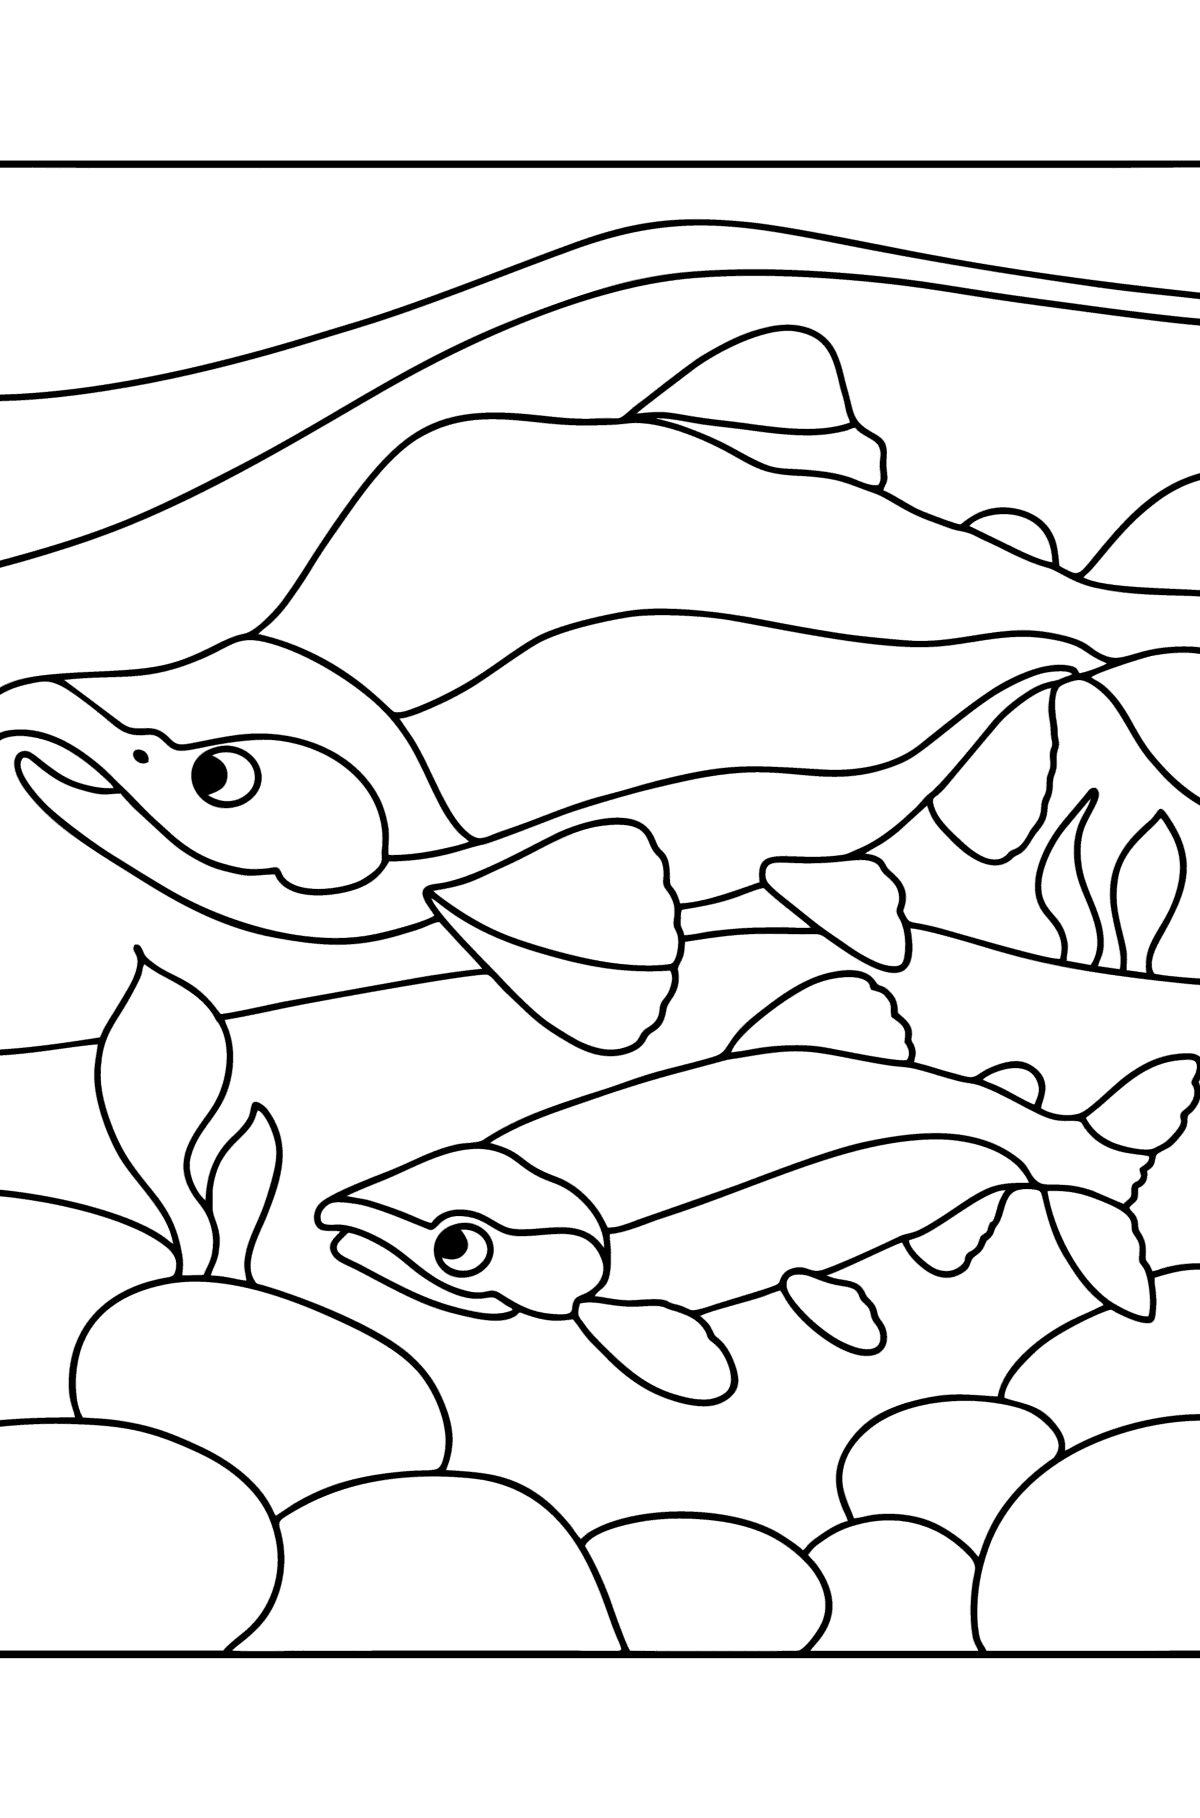 Red salmon coloring page - Coloring Pages for Kids